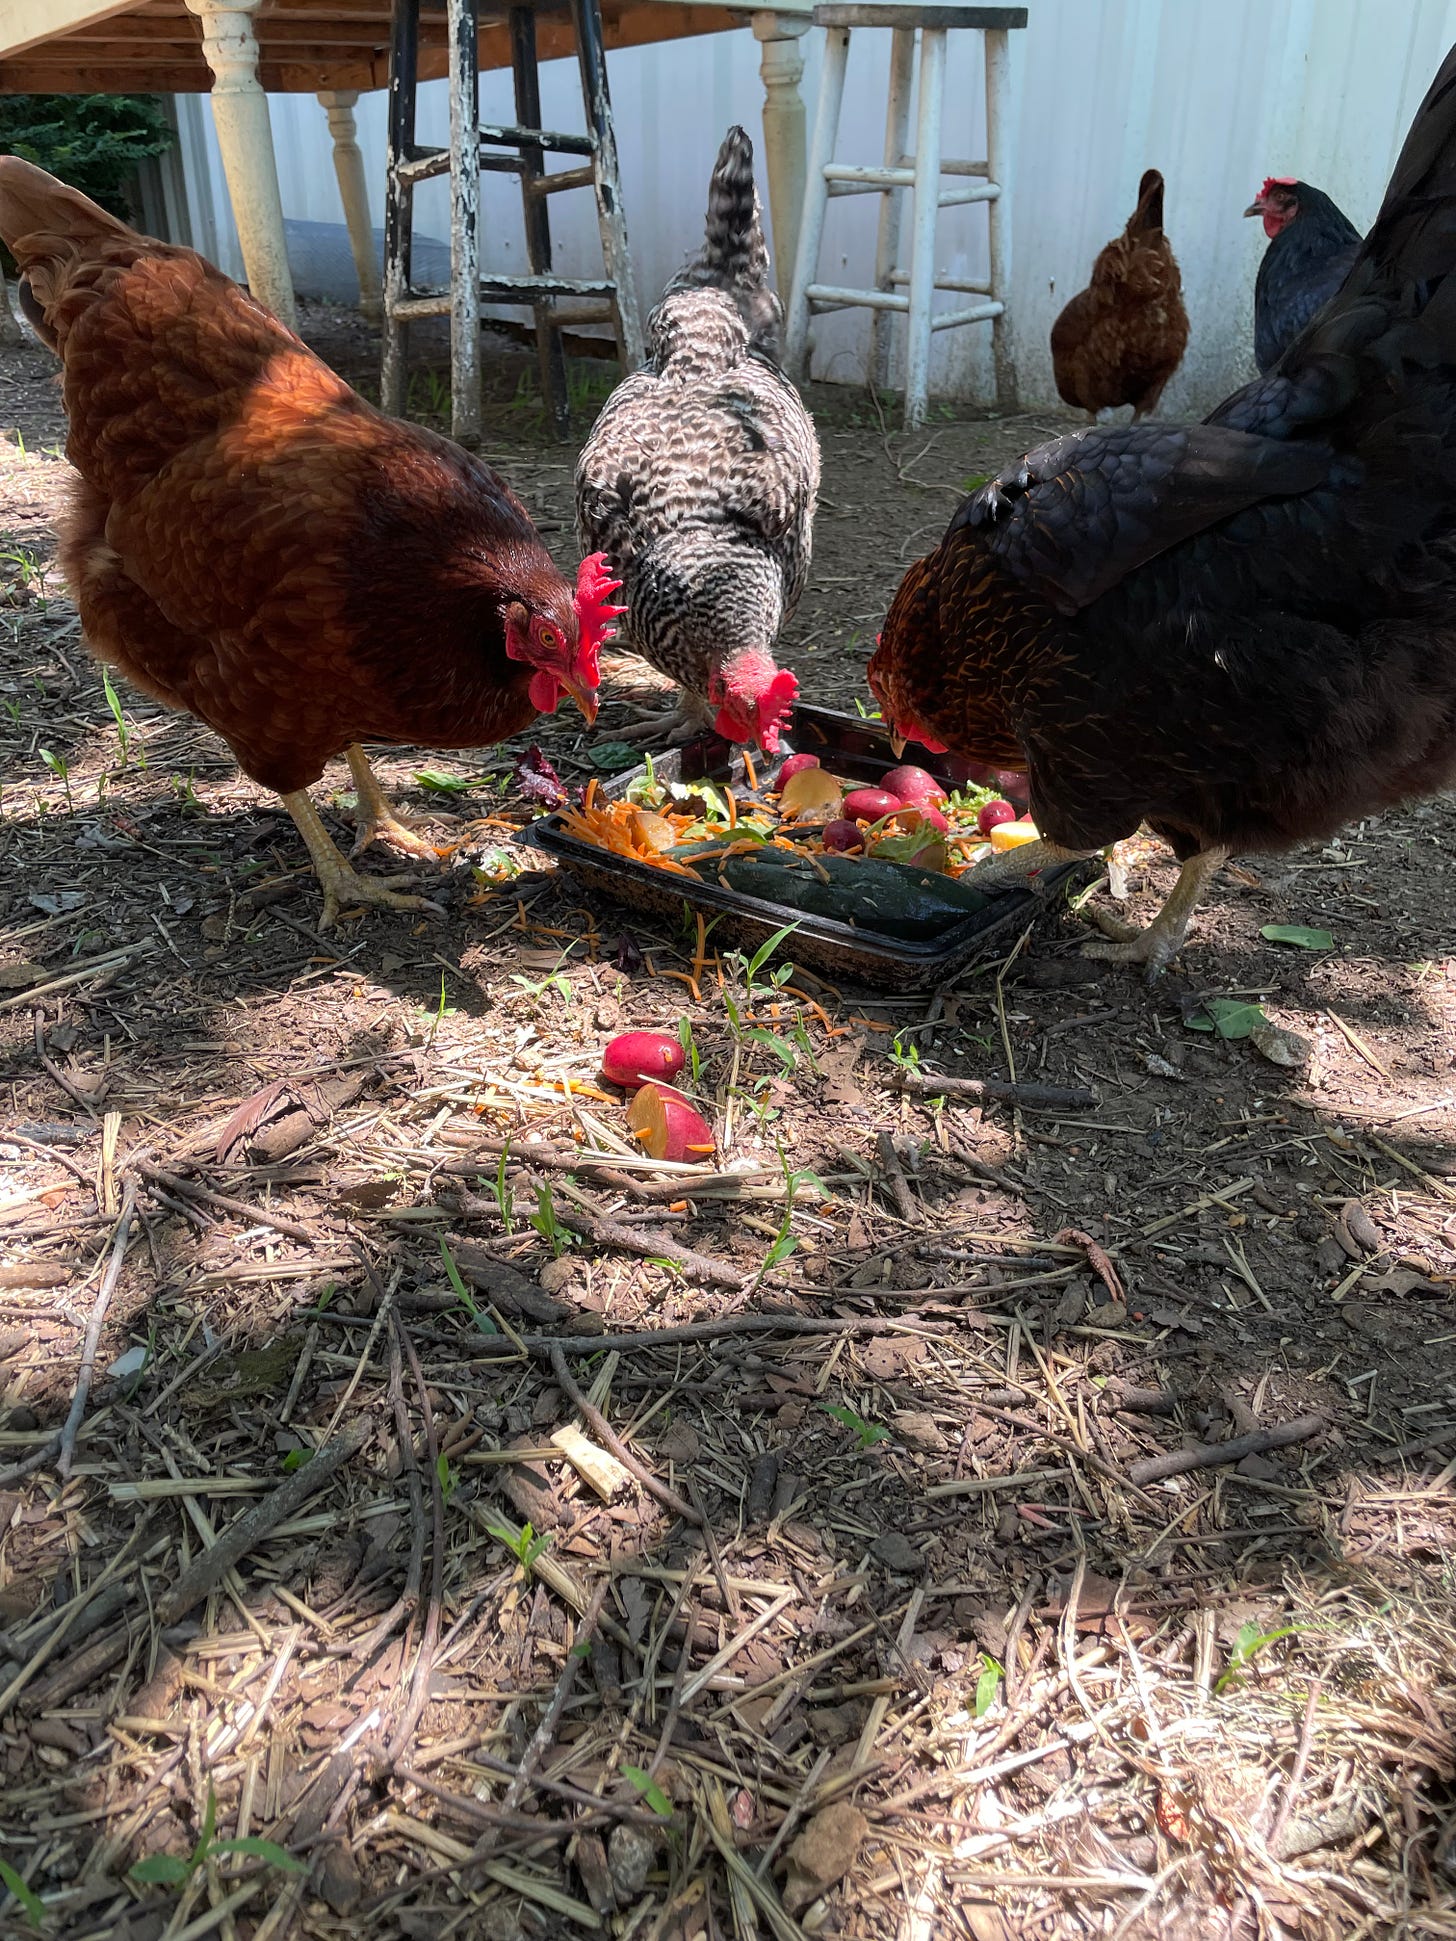 Chickens eat vegetables from a tray